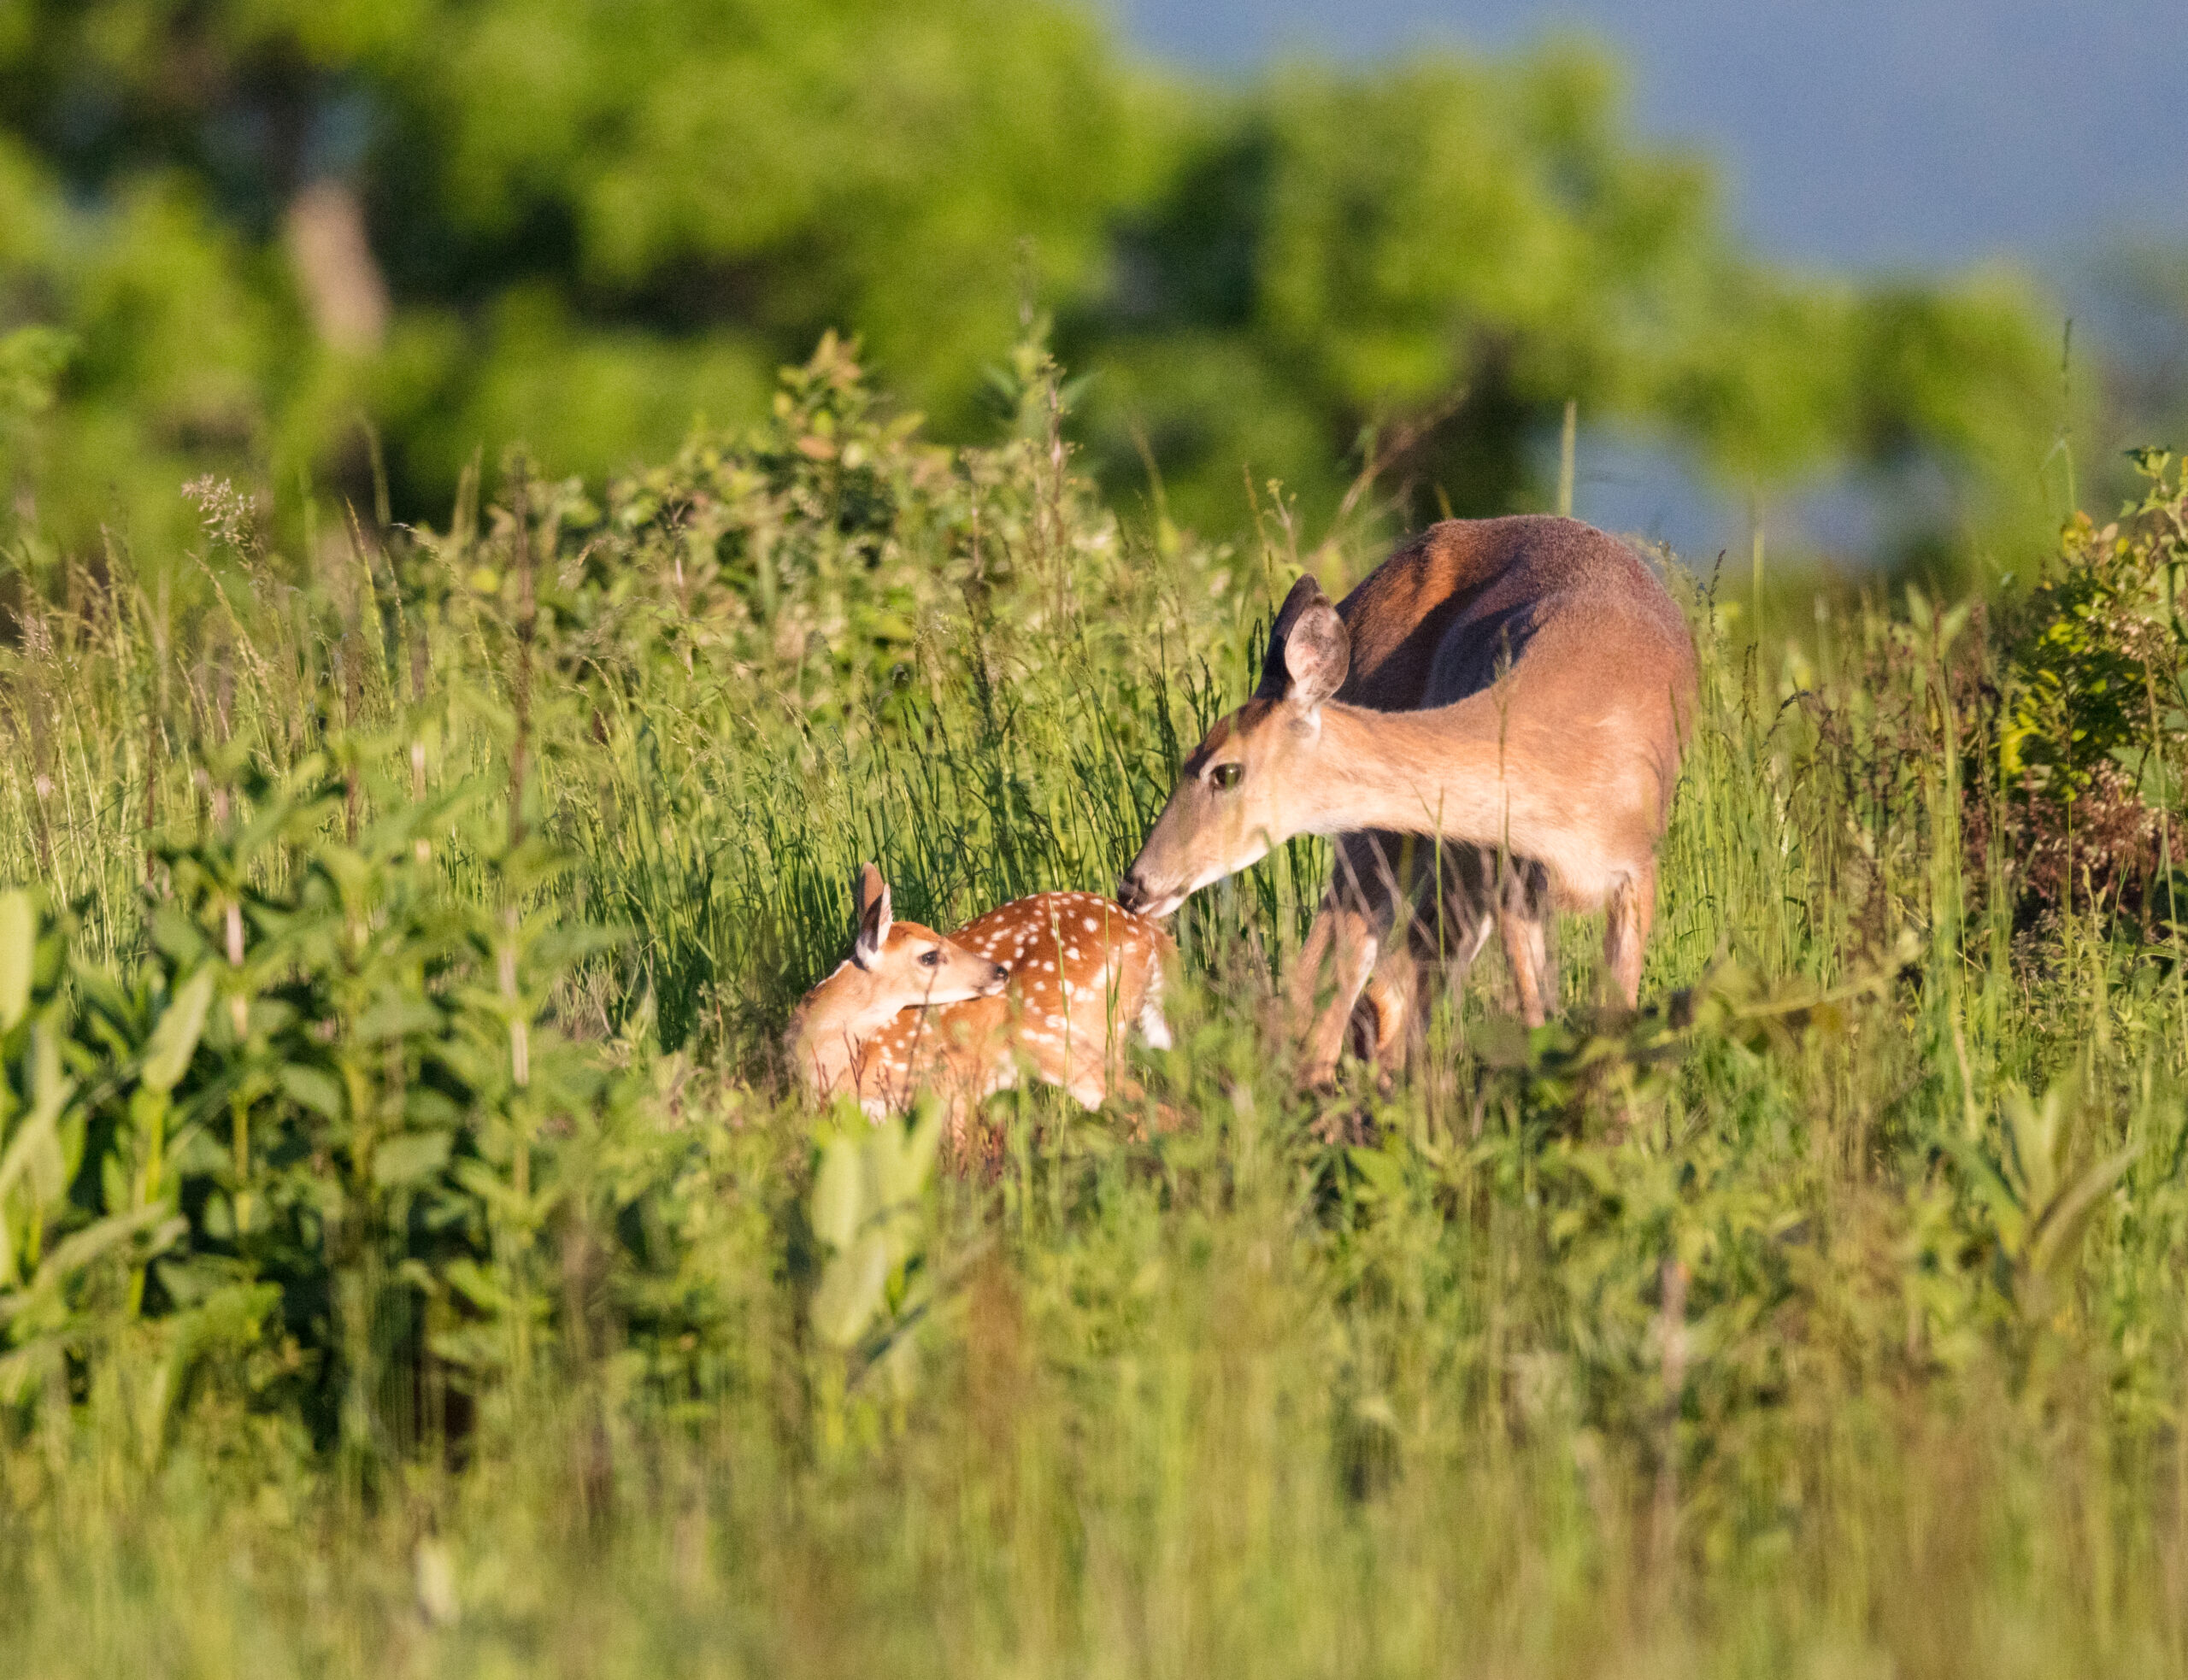 A whitetail doe nuzzles her spotted fawn in a green field.